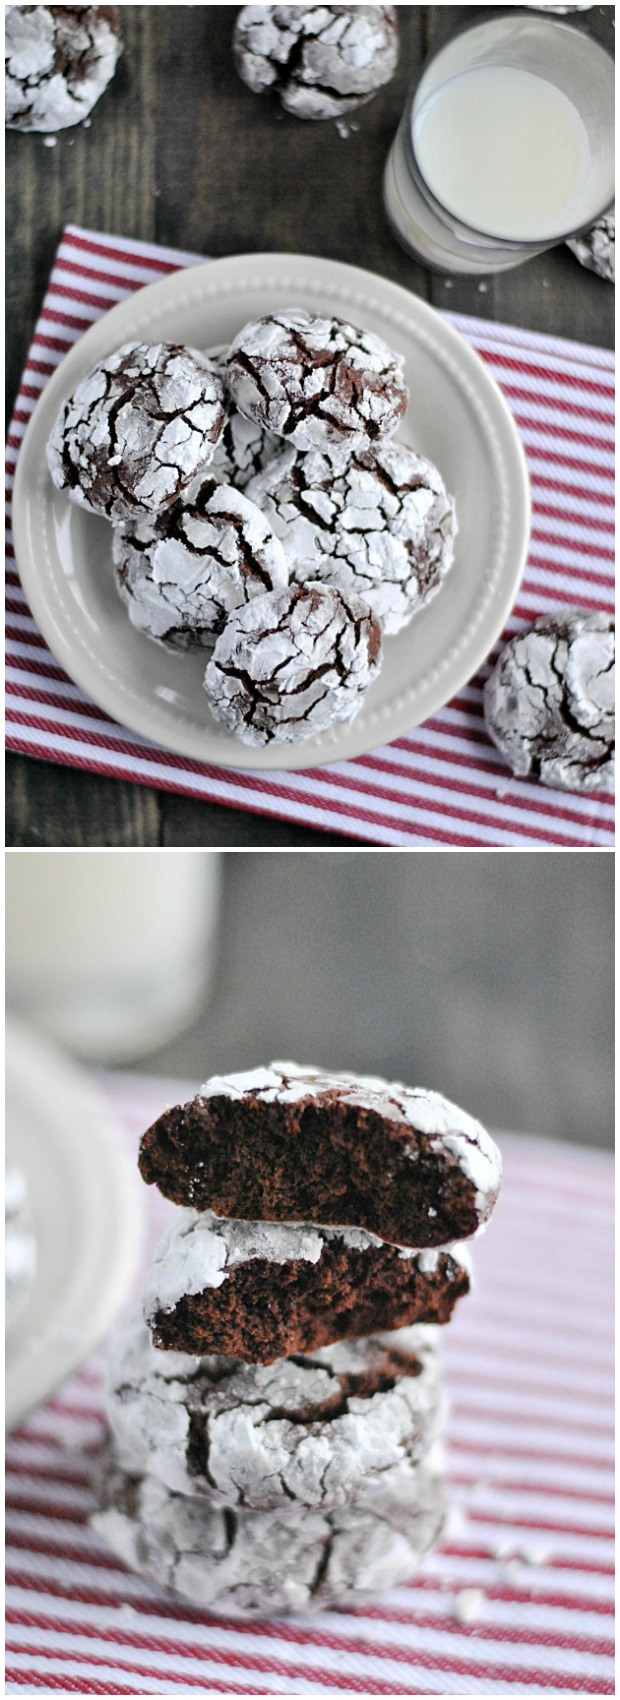 Easy and delicious chocolate crinkle cookie recipe